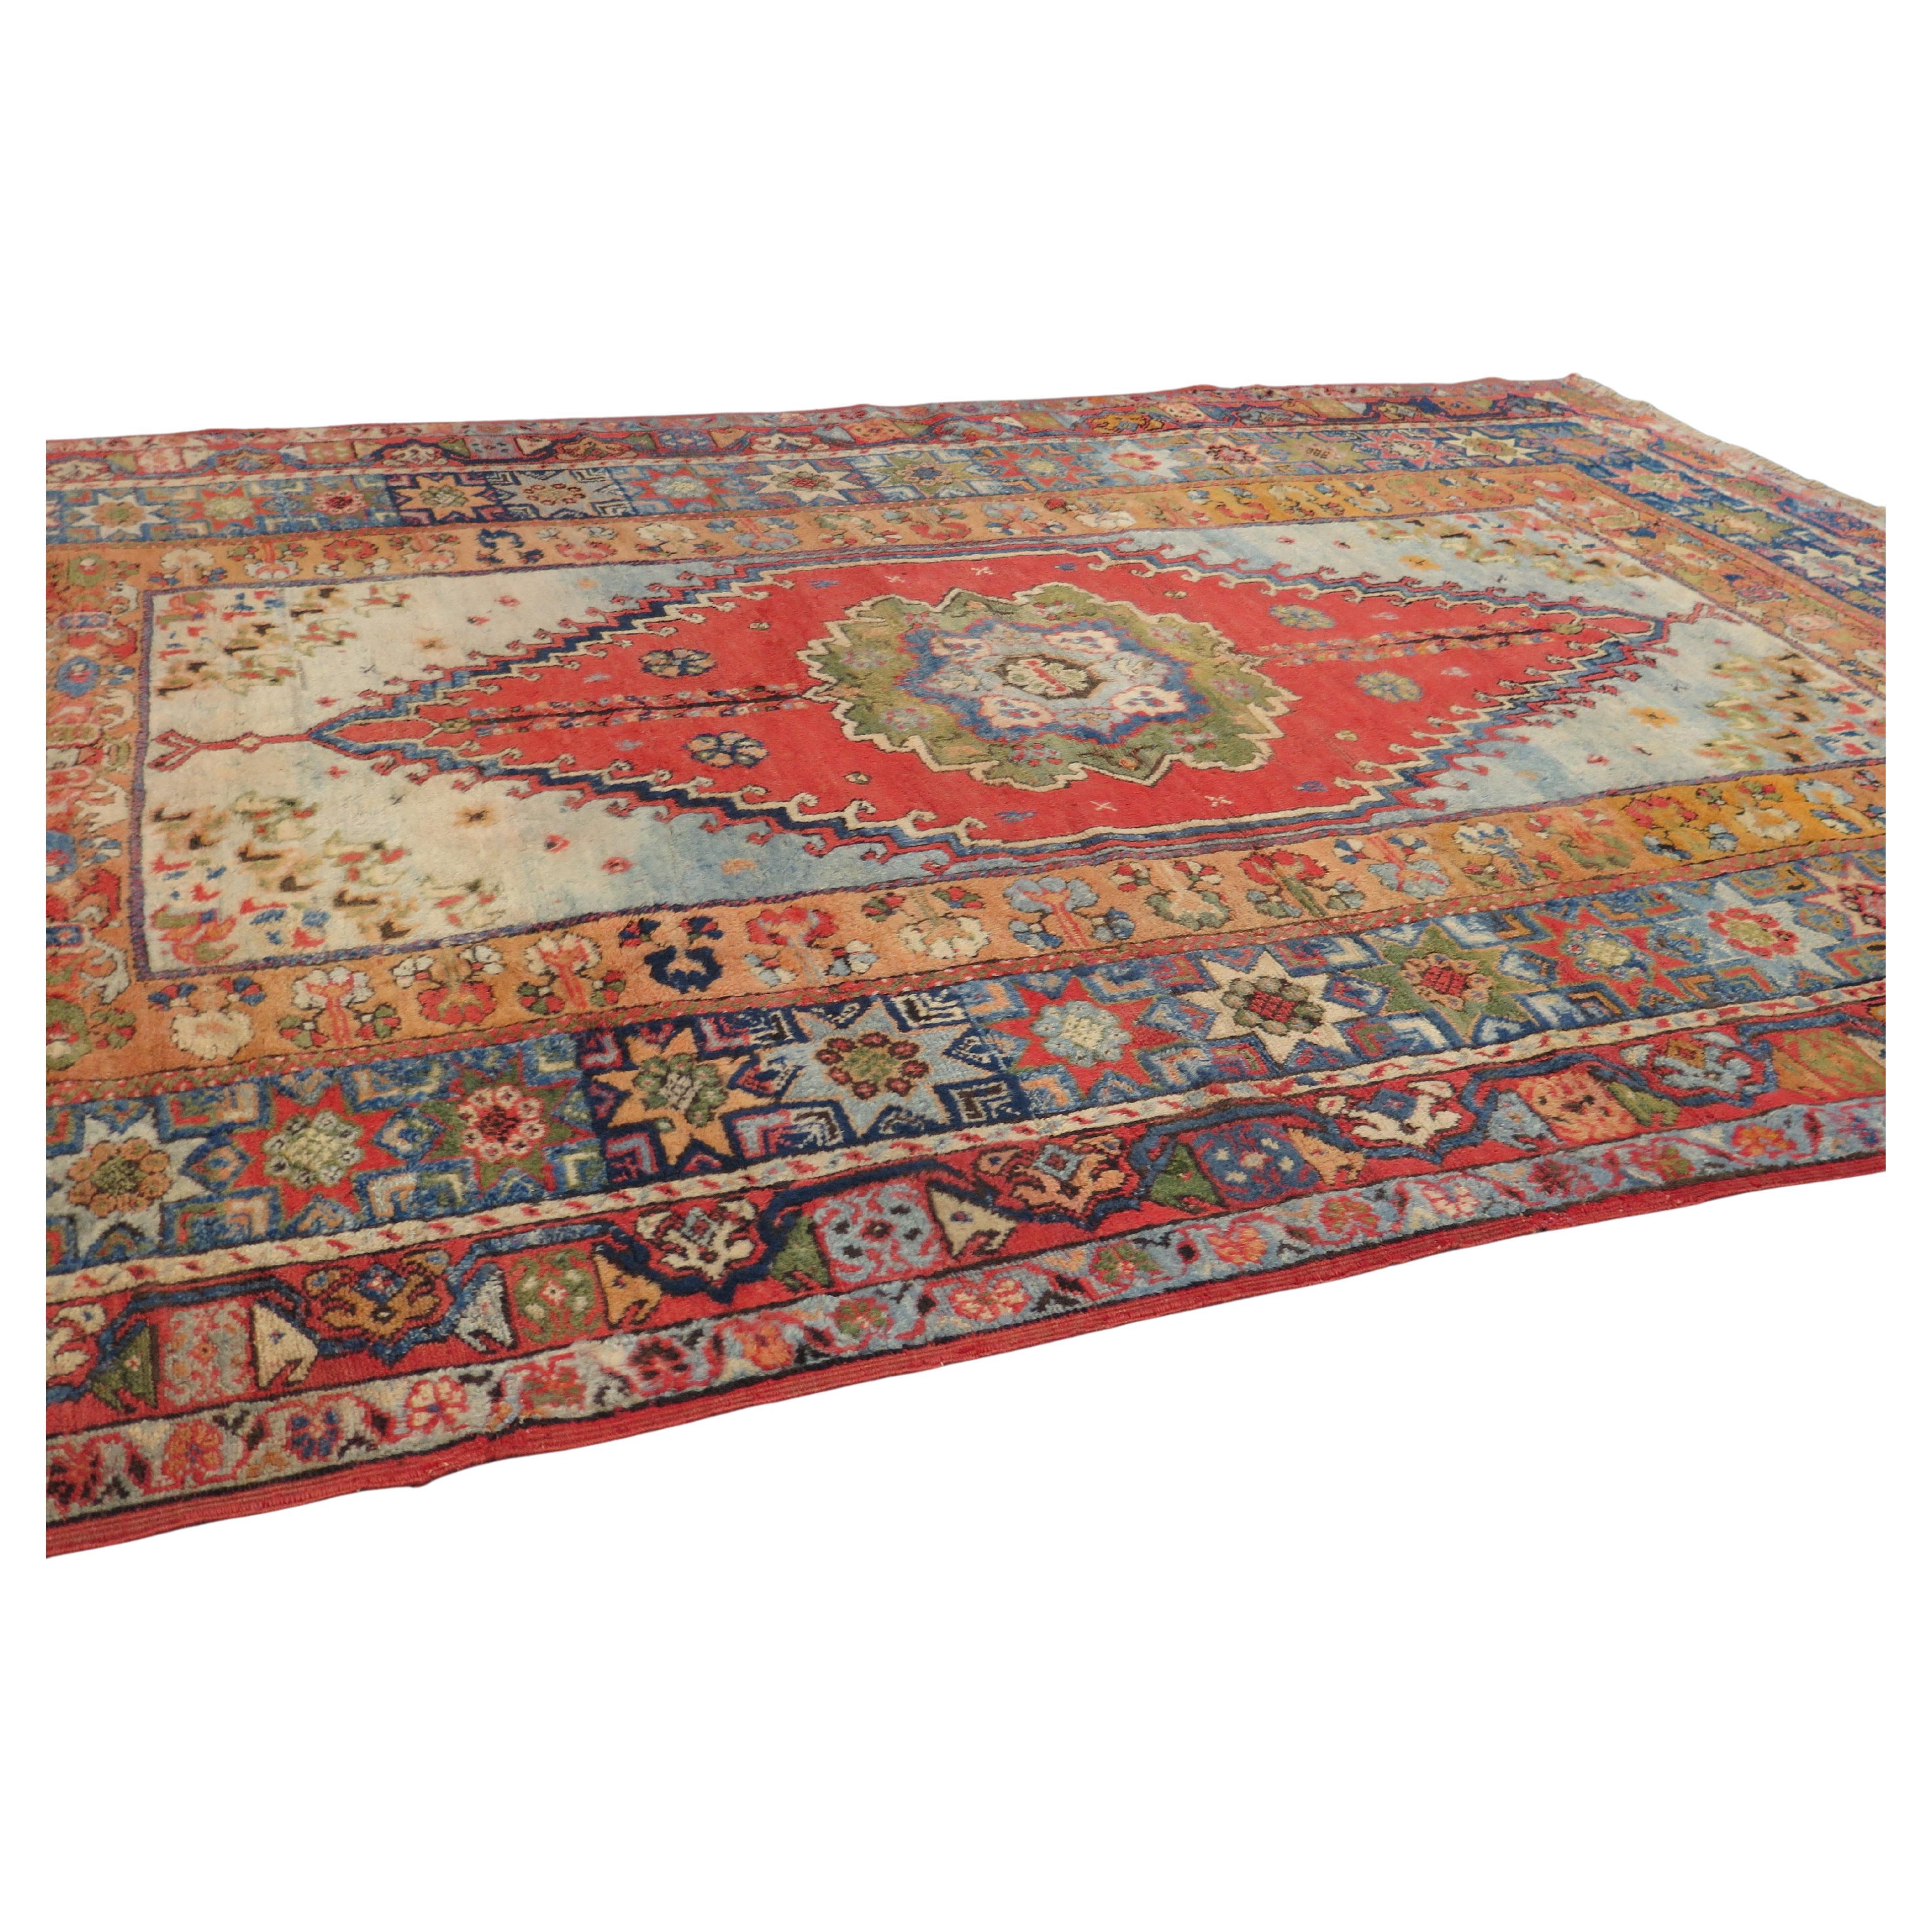 Exceptional 1920s Anatolian Carpet For Sale